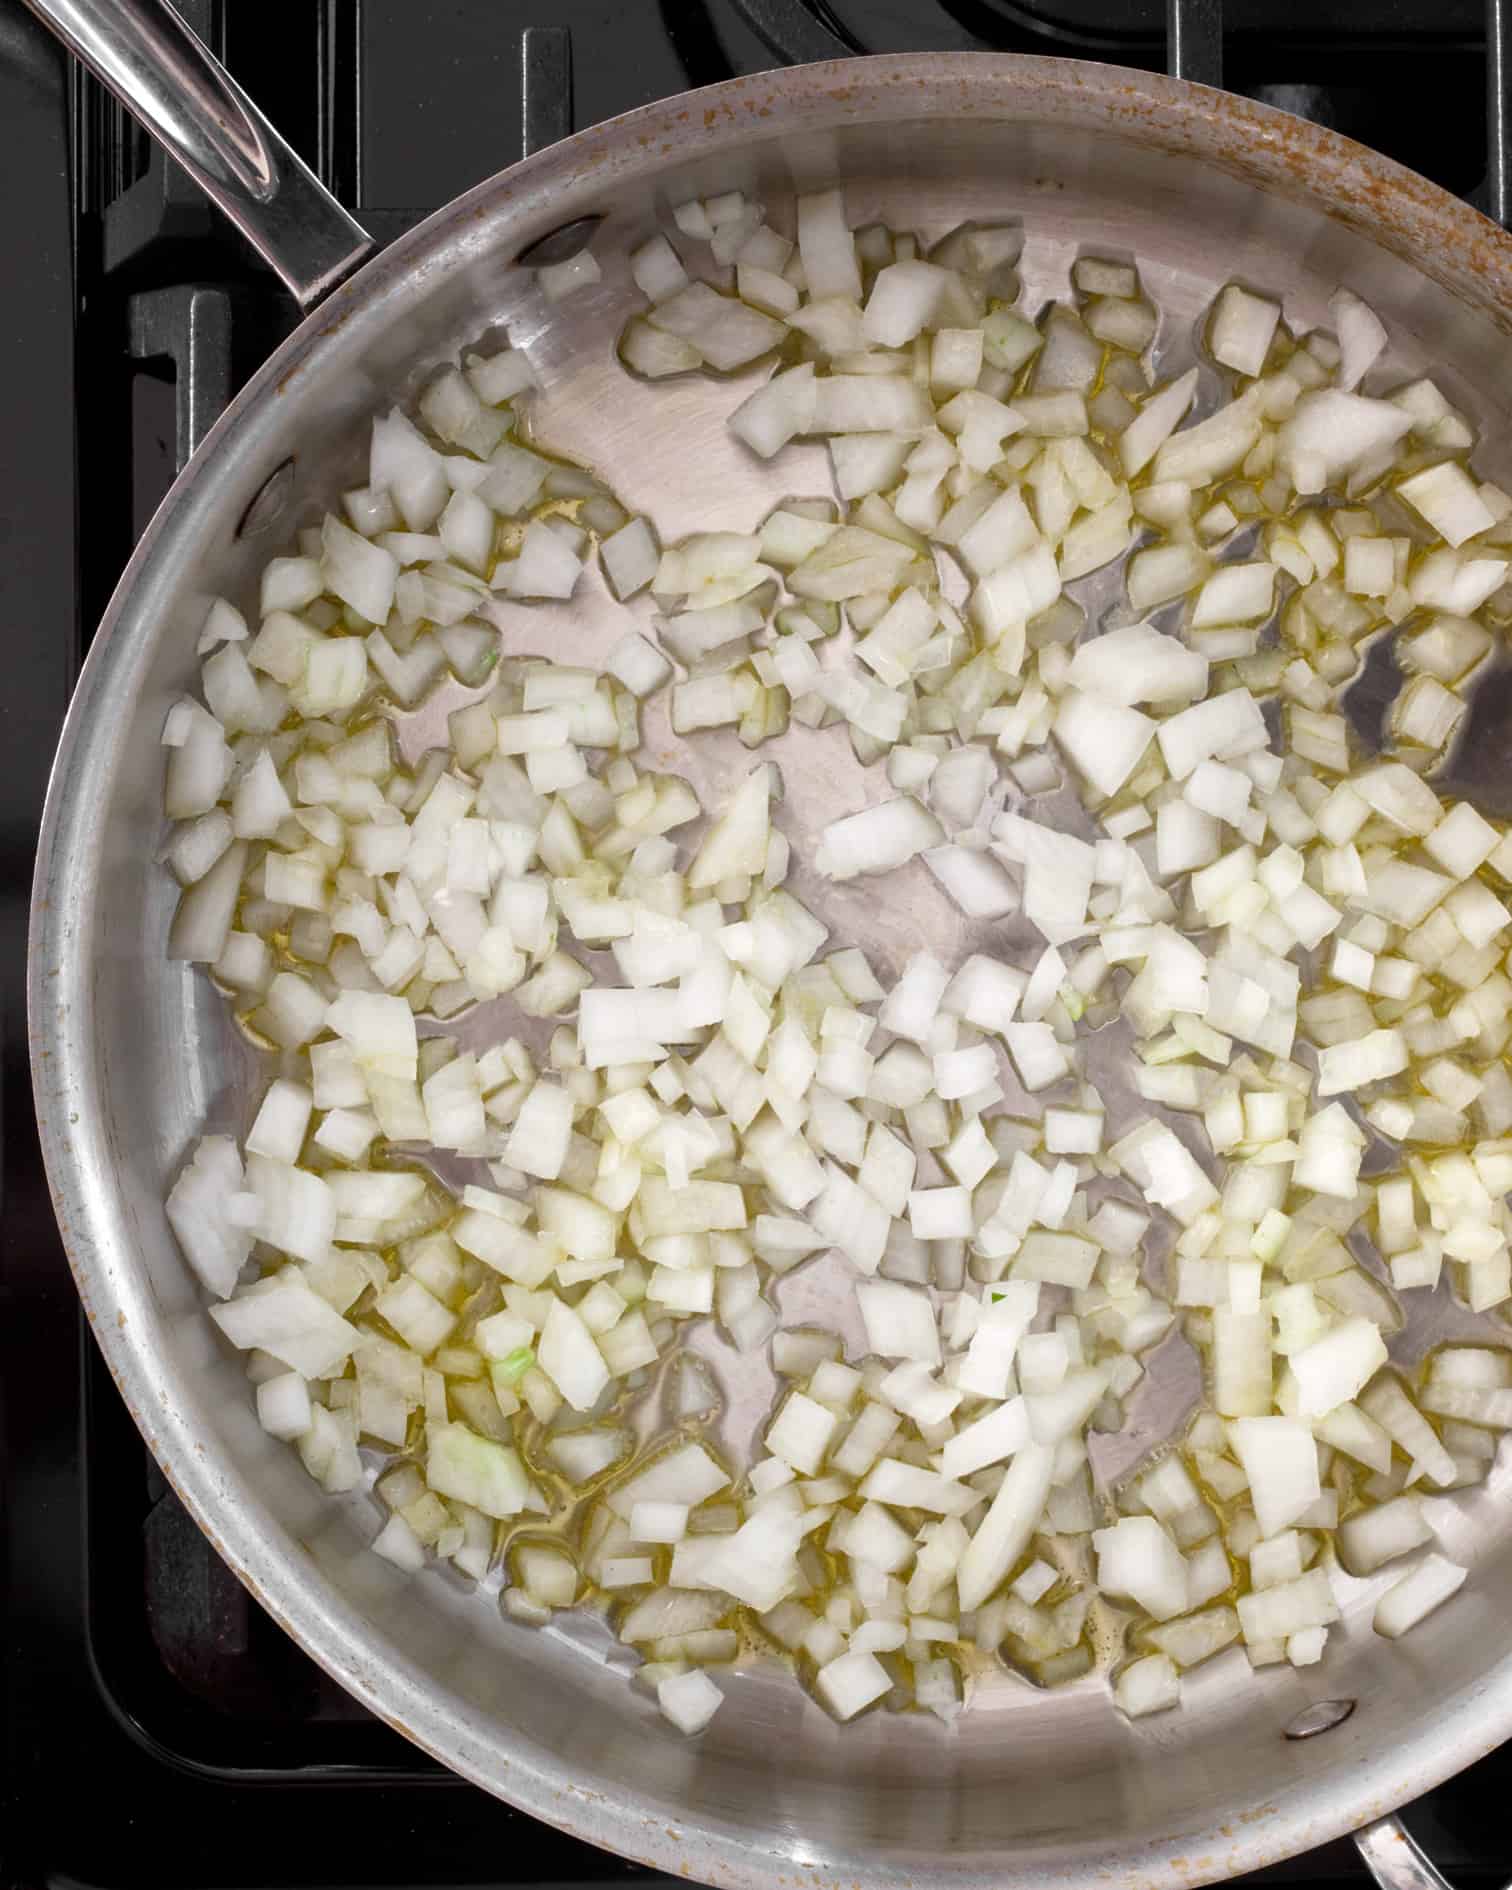 Saute the onions in a skillet